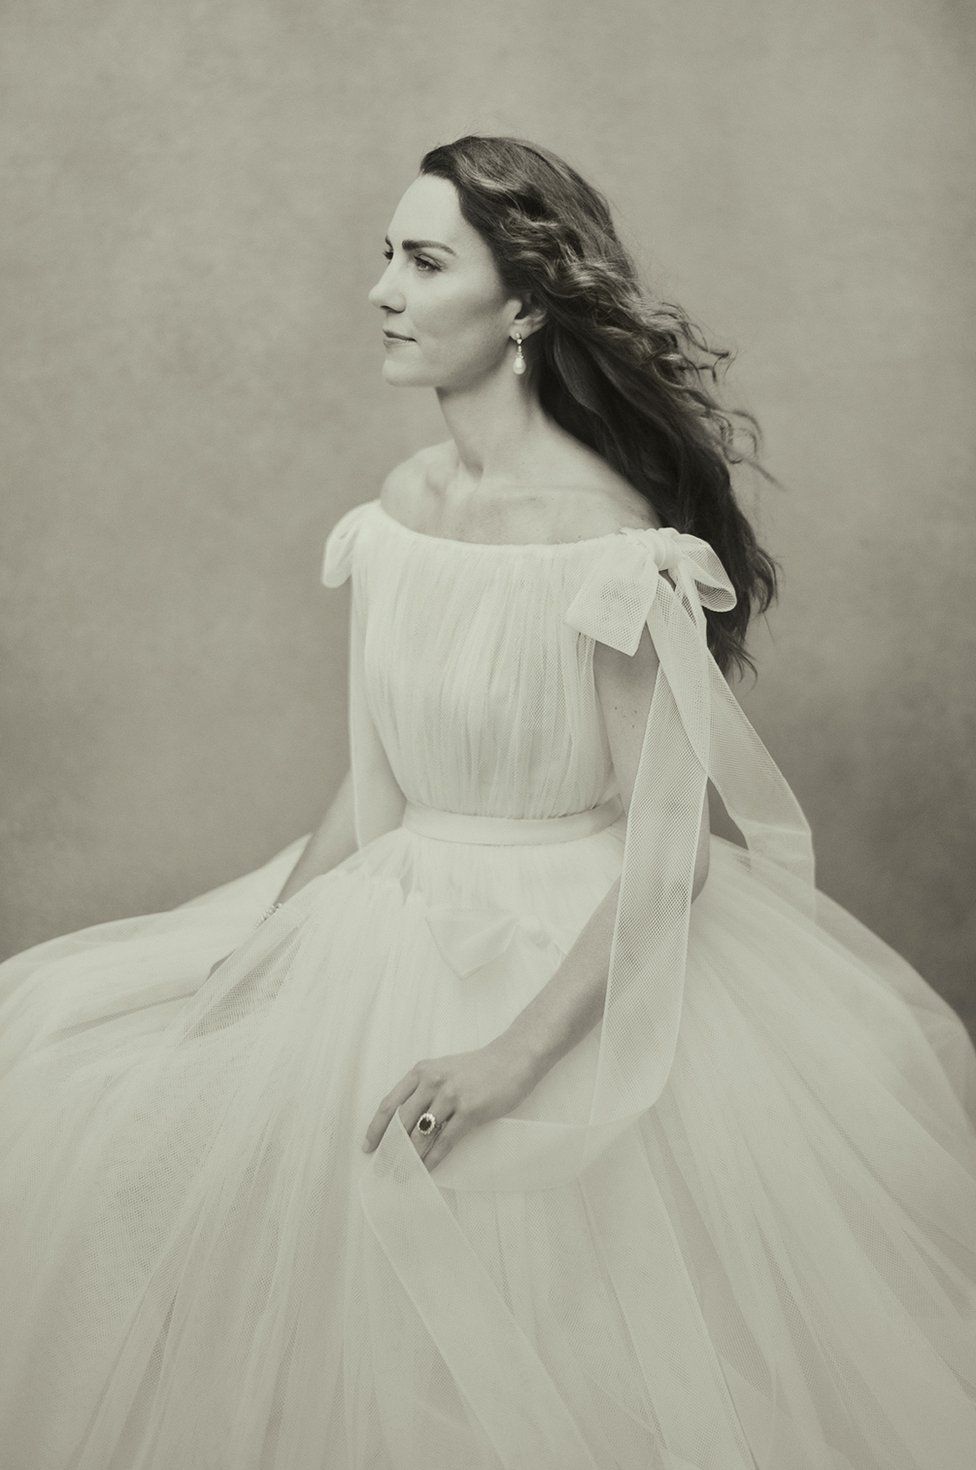 One of three new photographic portraits released by Kensington Palace of the Duchess of Cambridge